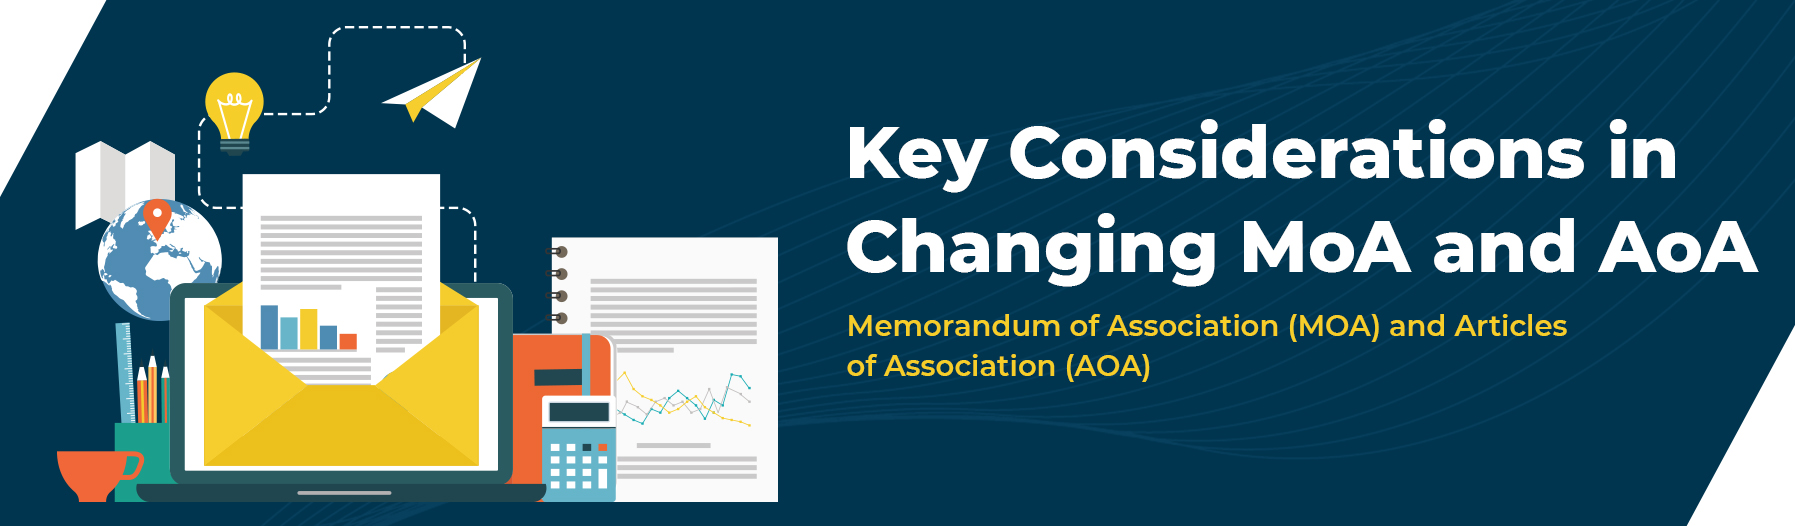 Key-Considerations-in-Changing-MoA-and-AoA